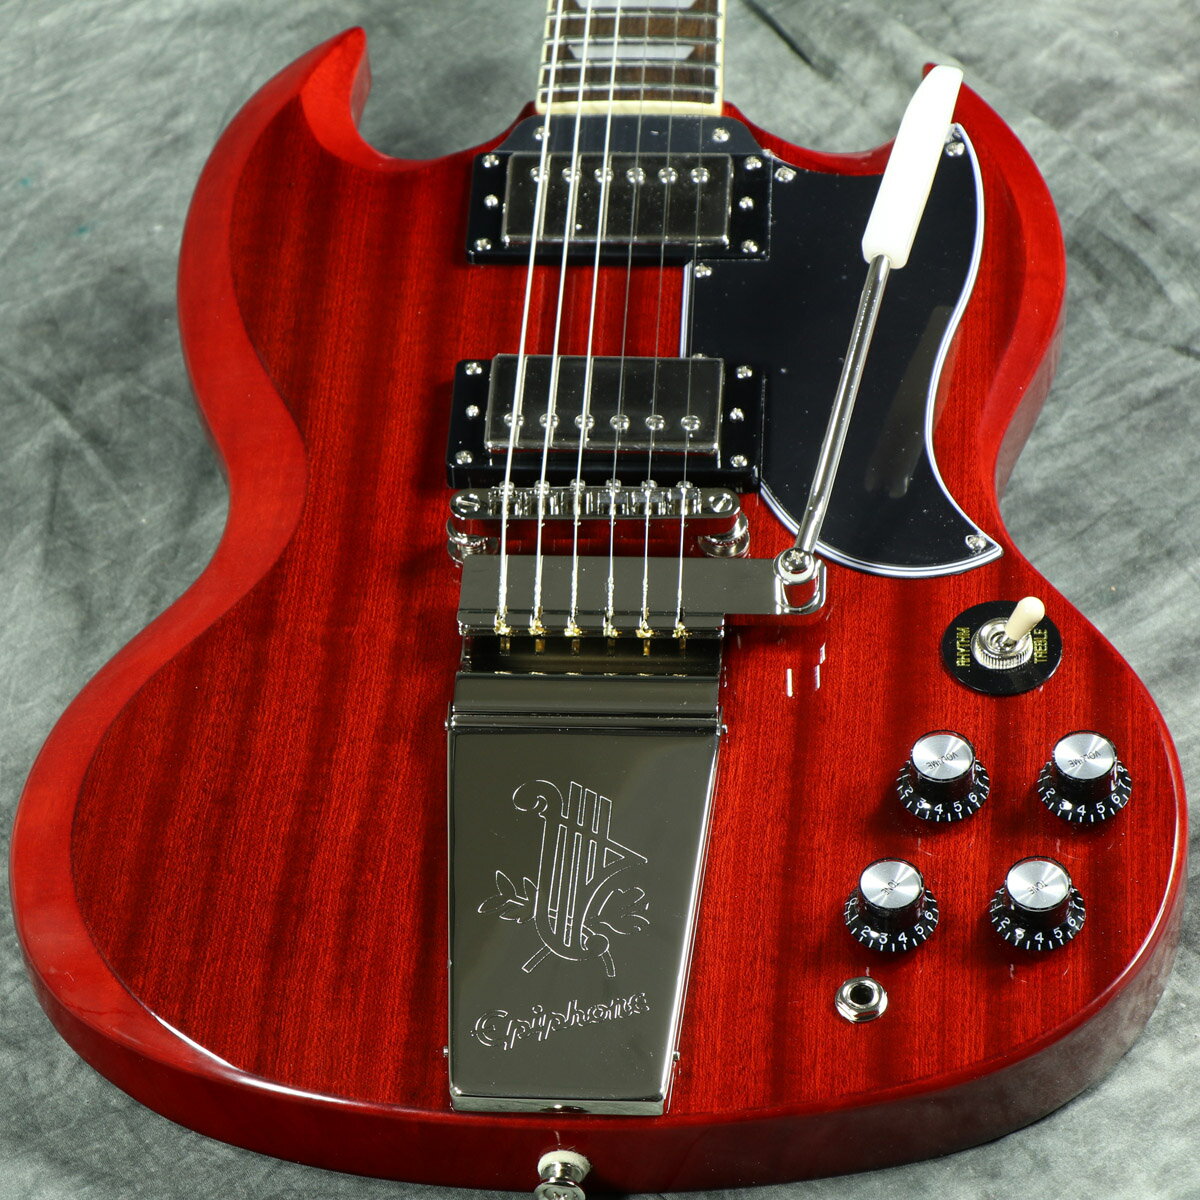 Epiphone by Gibson / Inspired by Gibson SG Standard 60s Maestro Vibrola Vintage Cherry エピフォン エレキギター 【横浜店】